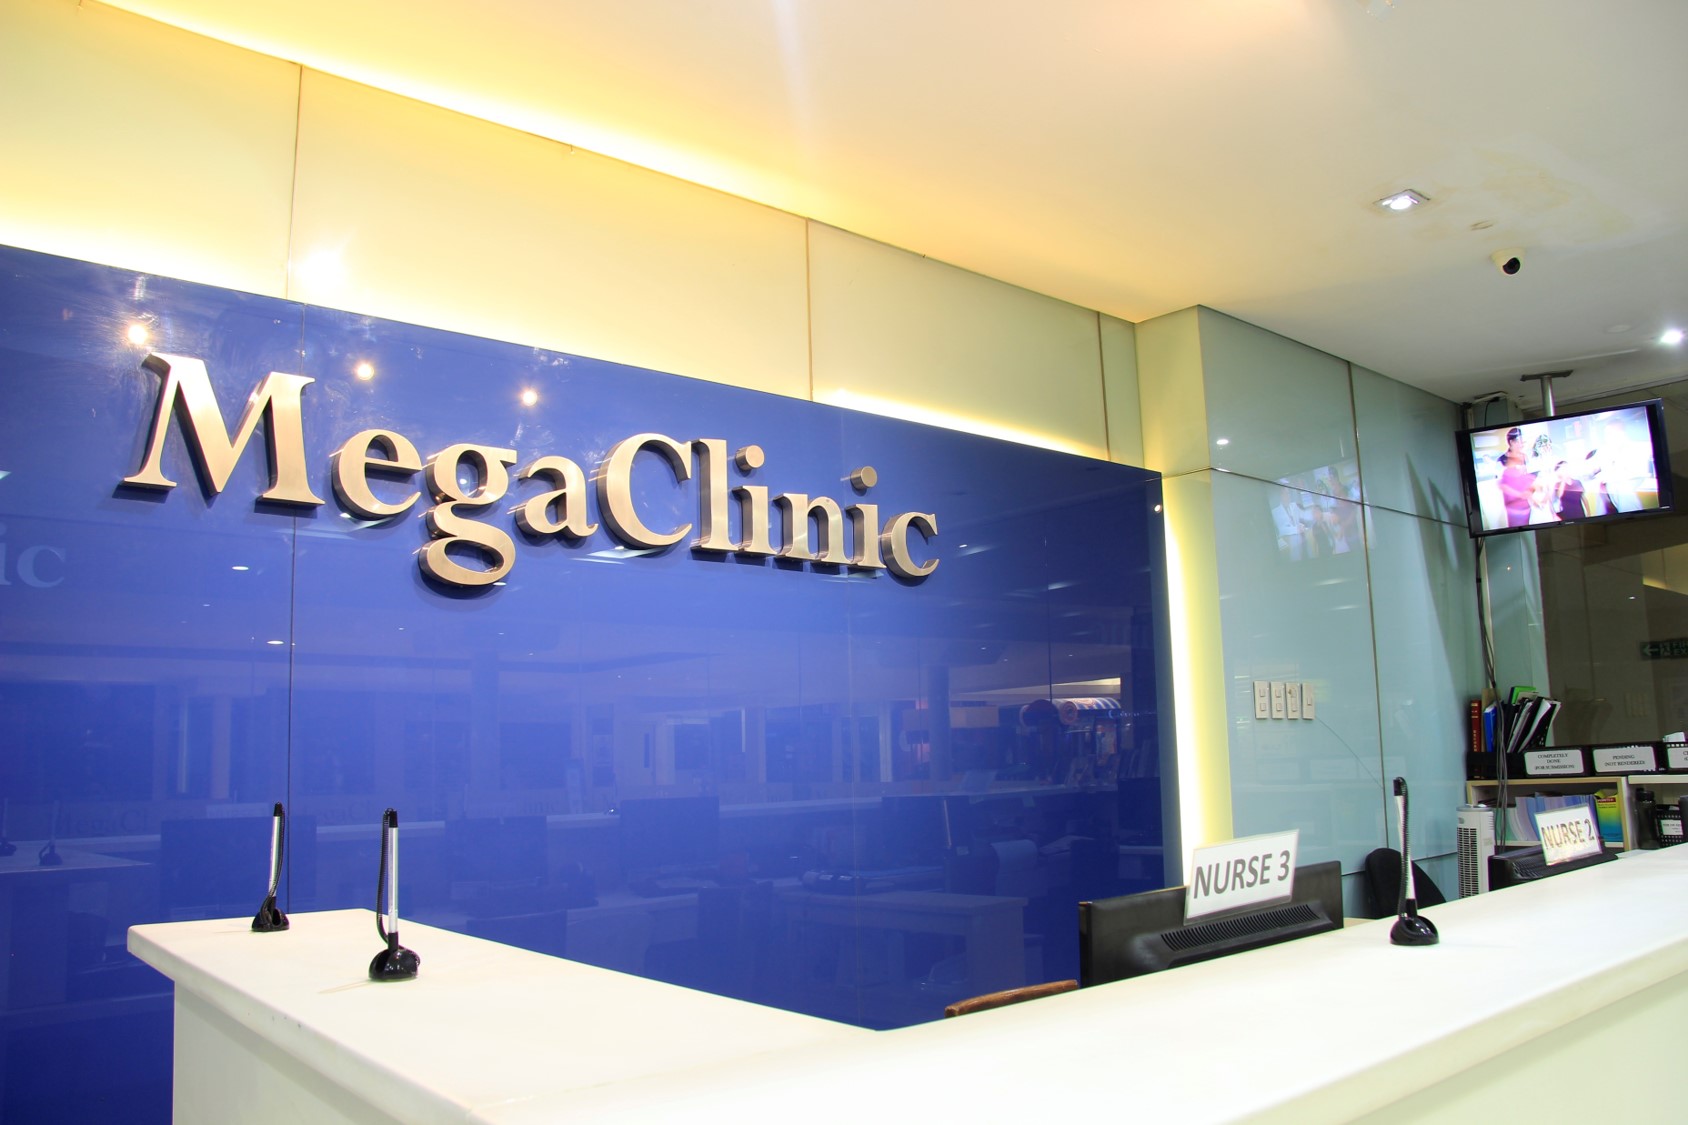 Metro Sanitas starts a network of medical clinics in the Philippines with the acquisition of MegaClinic